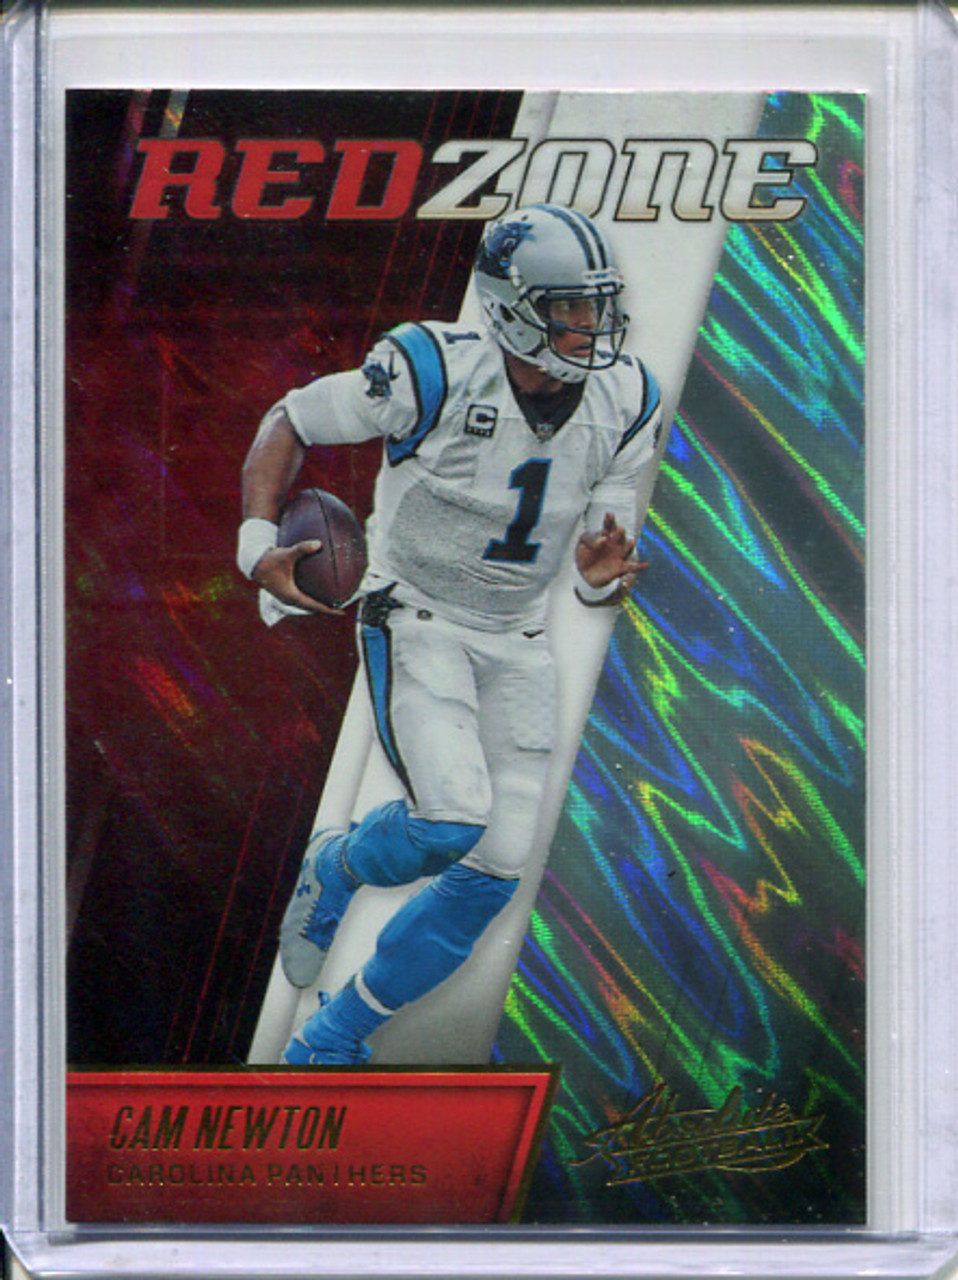 Cam Newton 2016 Absolute, Red Zone #8